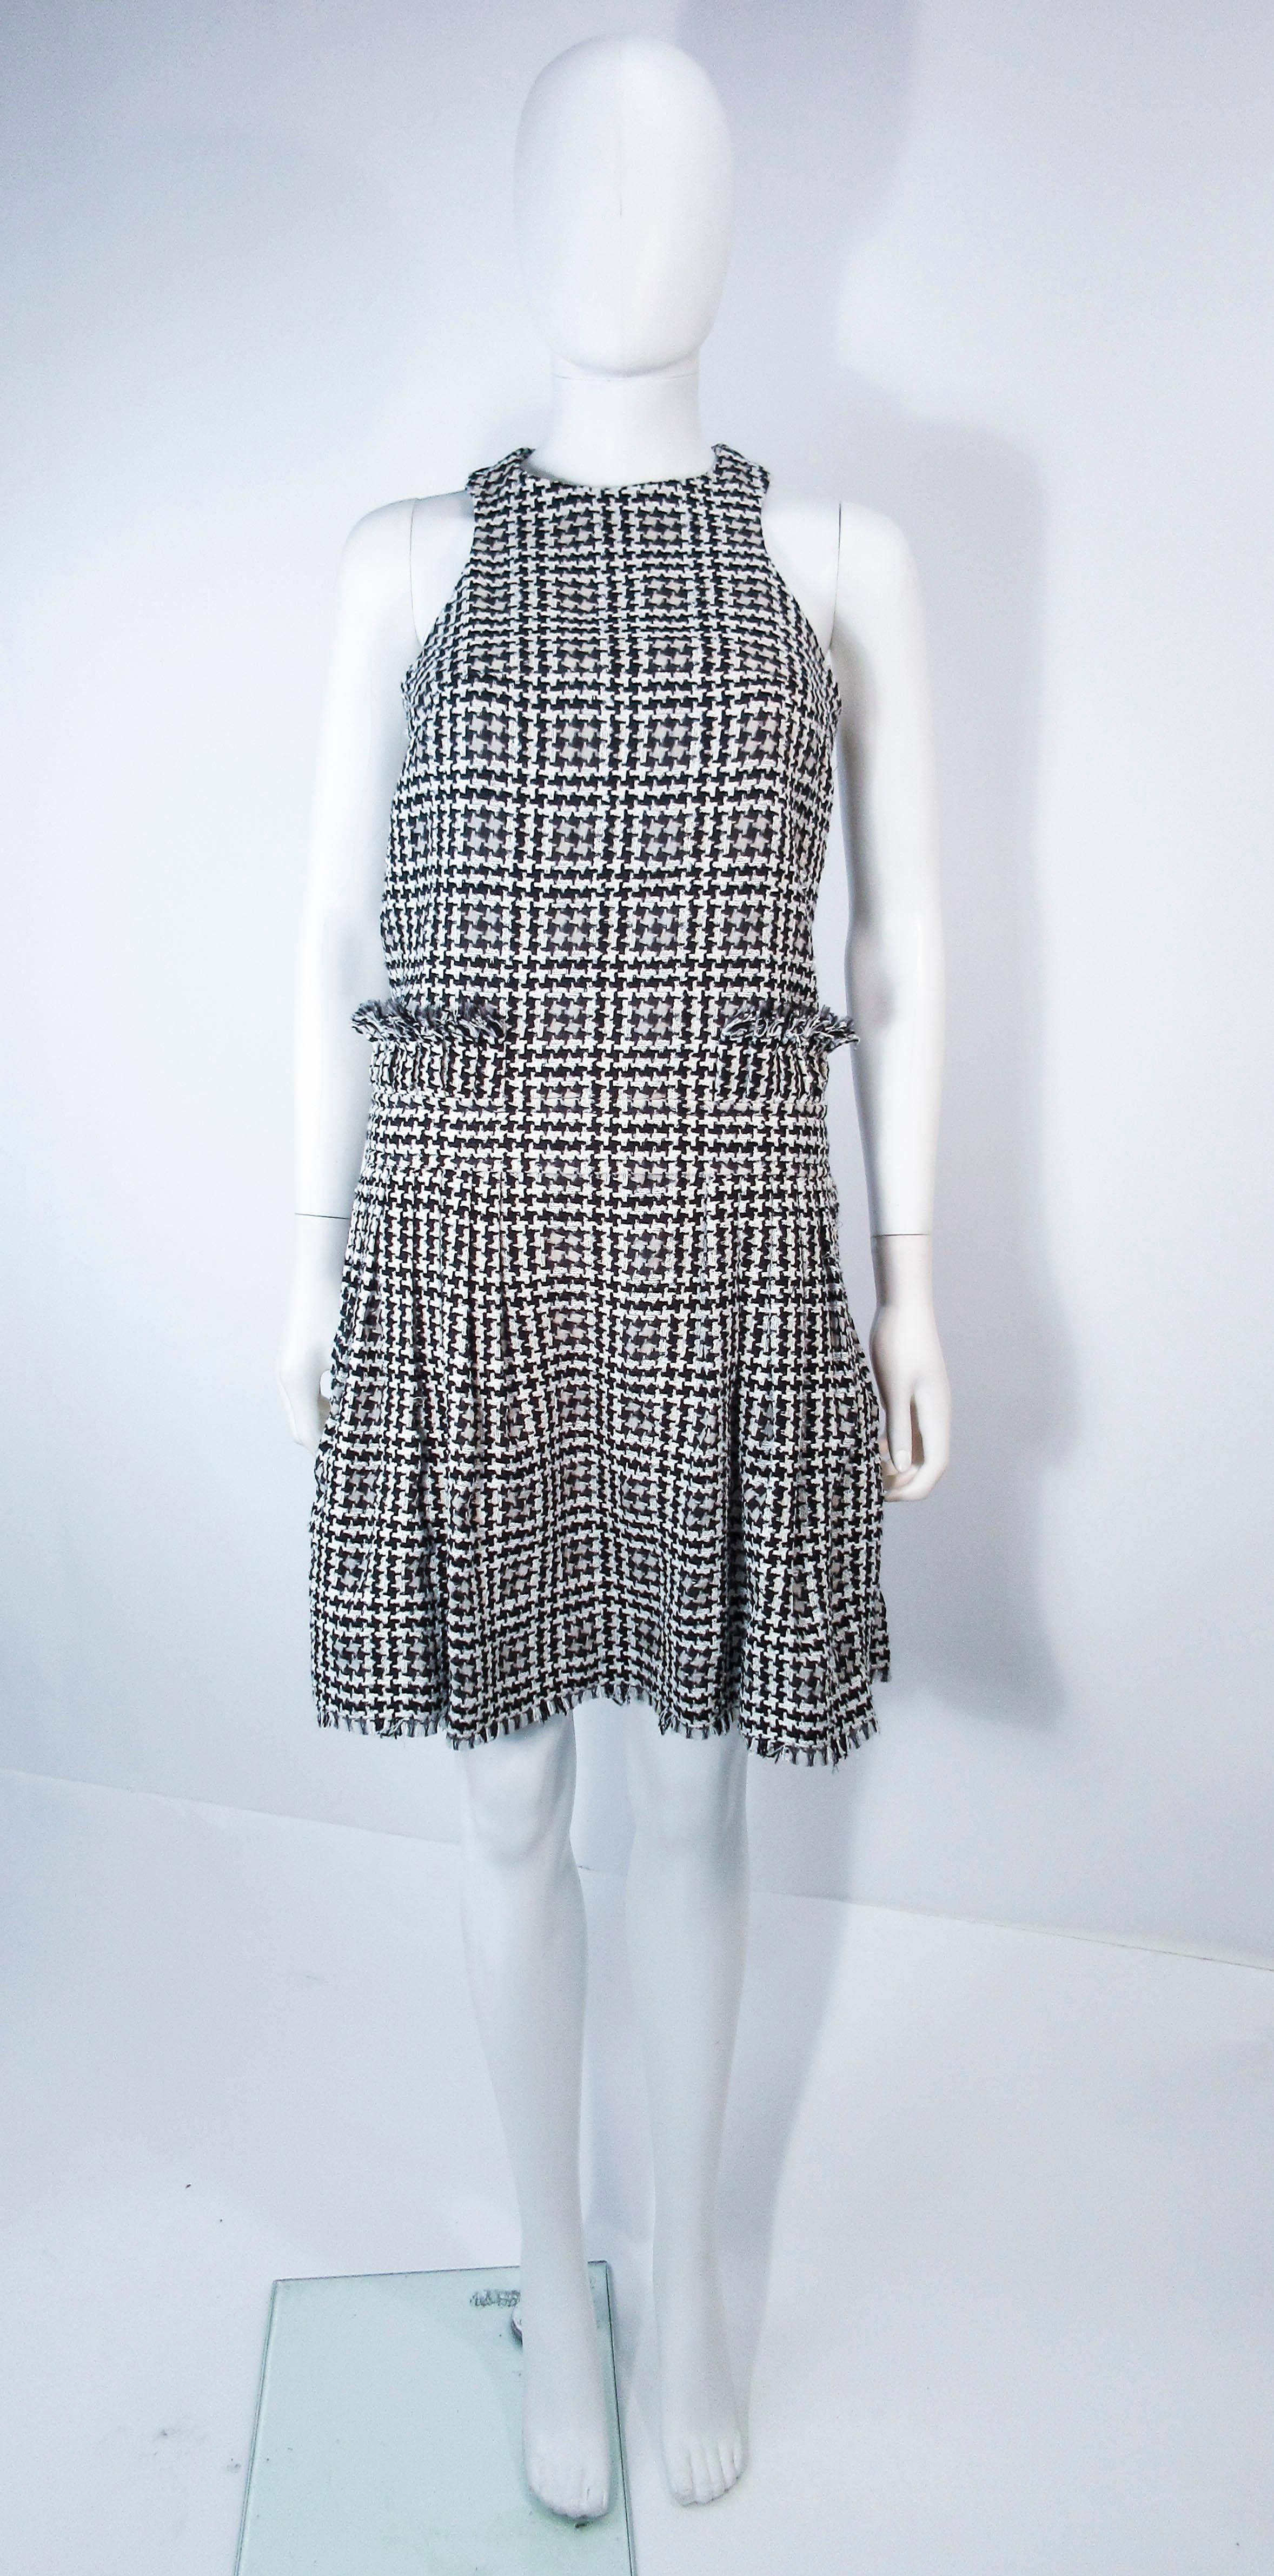 This Chanel dress is composed of black & white tweed. Features a criss cross back with frayed waist accents. There are buttons at the shoulders. In excellent vintage condition.

**Please cross-reference measurements for personal accuracy. Size in